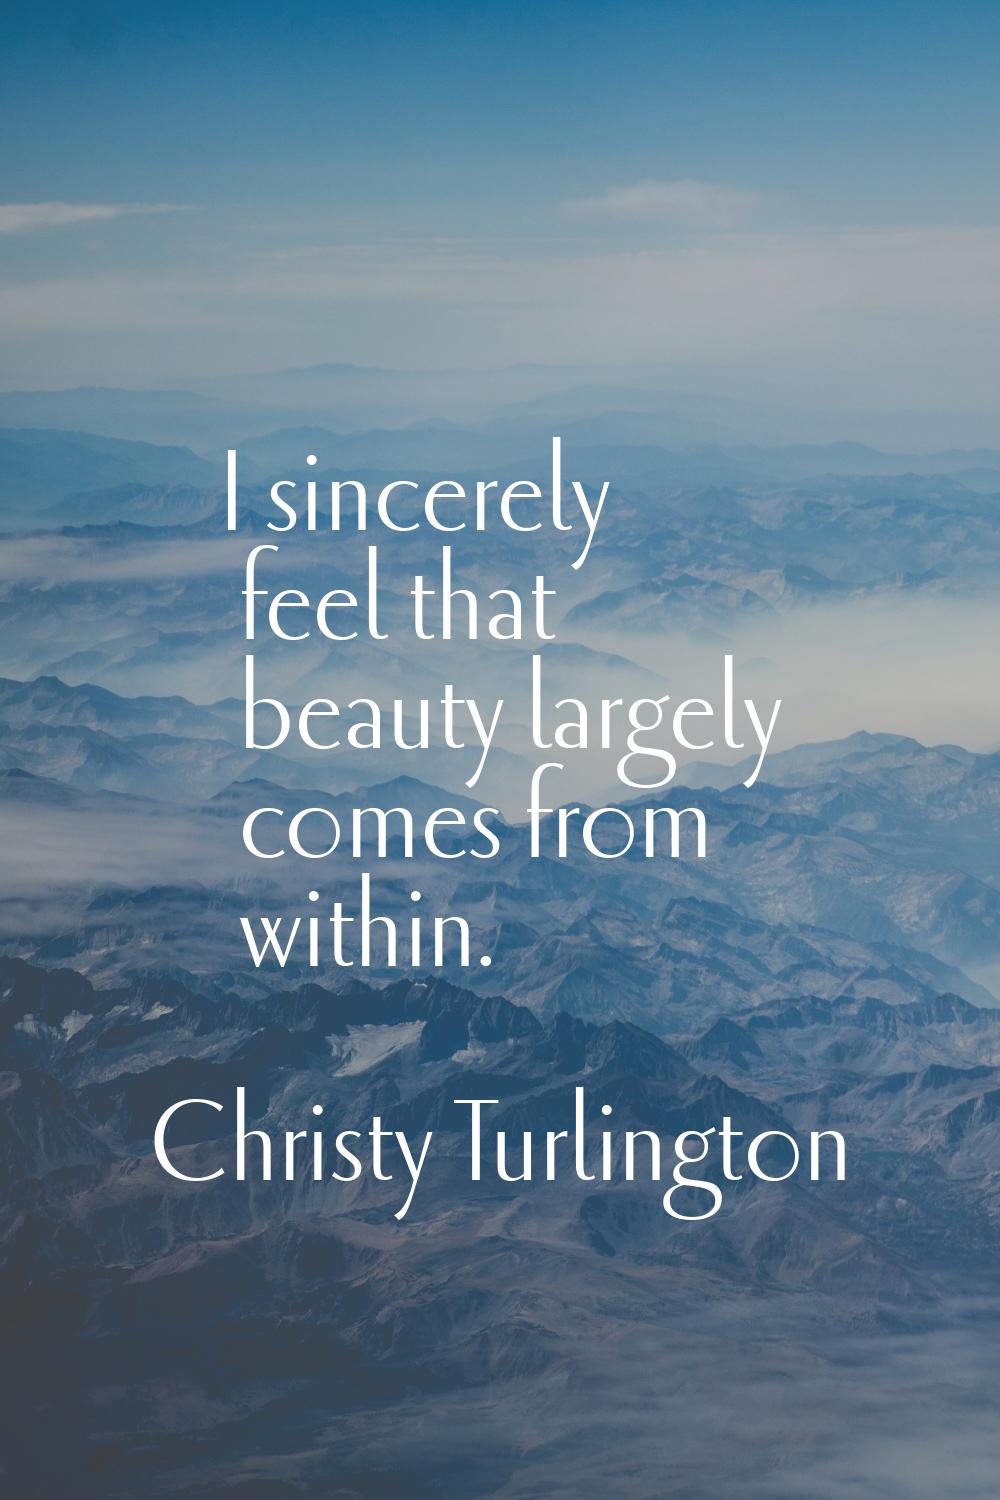 I sincerely feel that beauty largely comes from within.